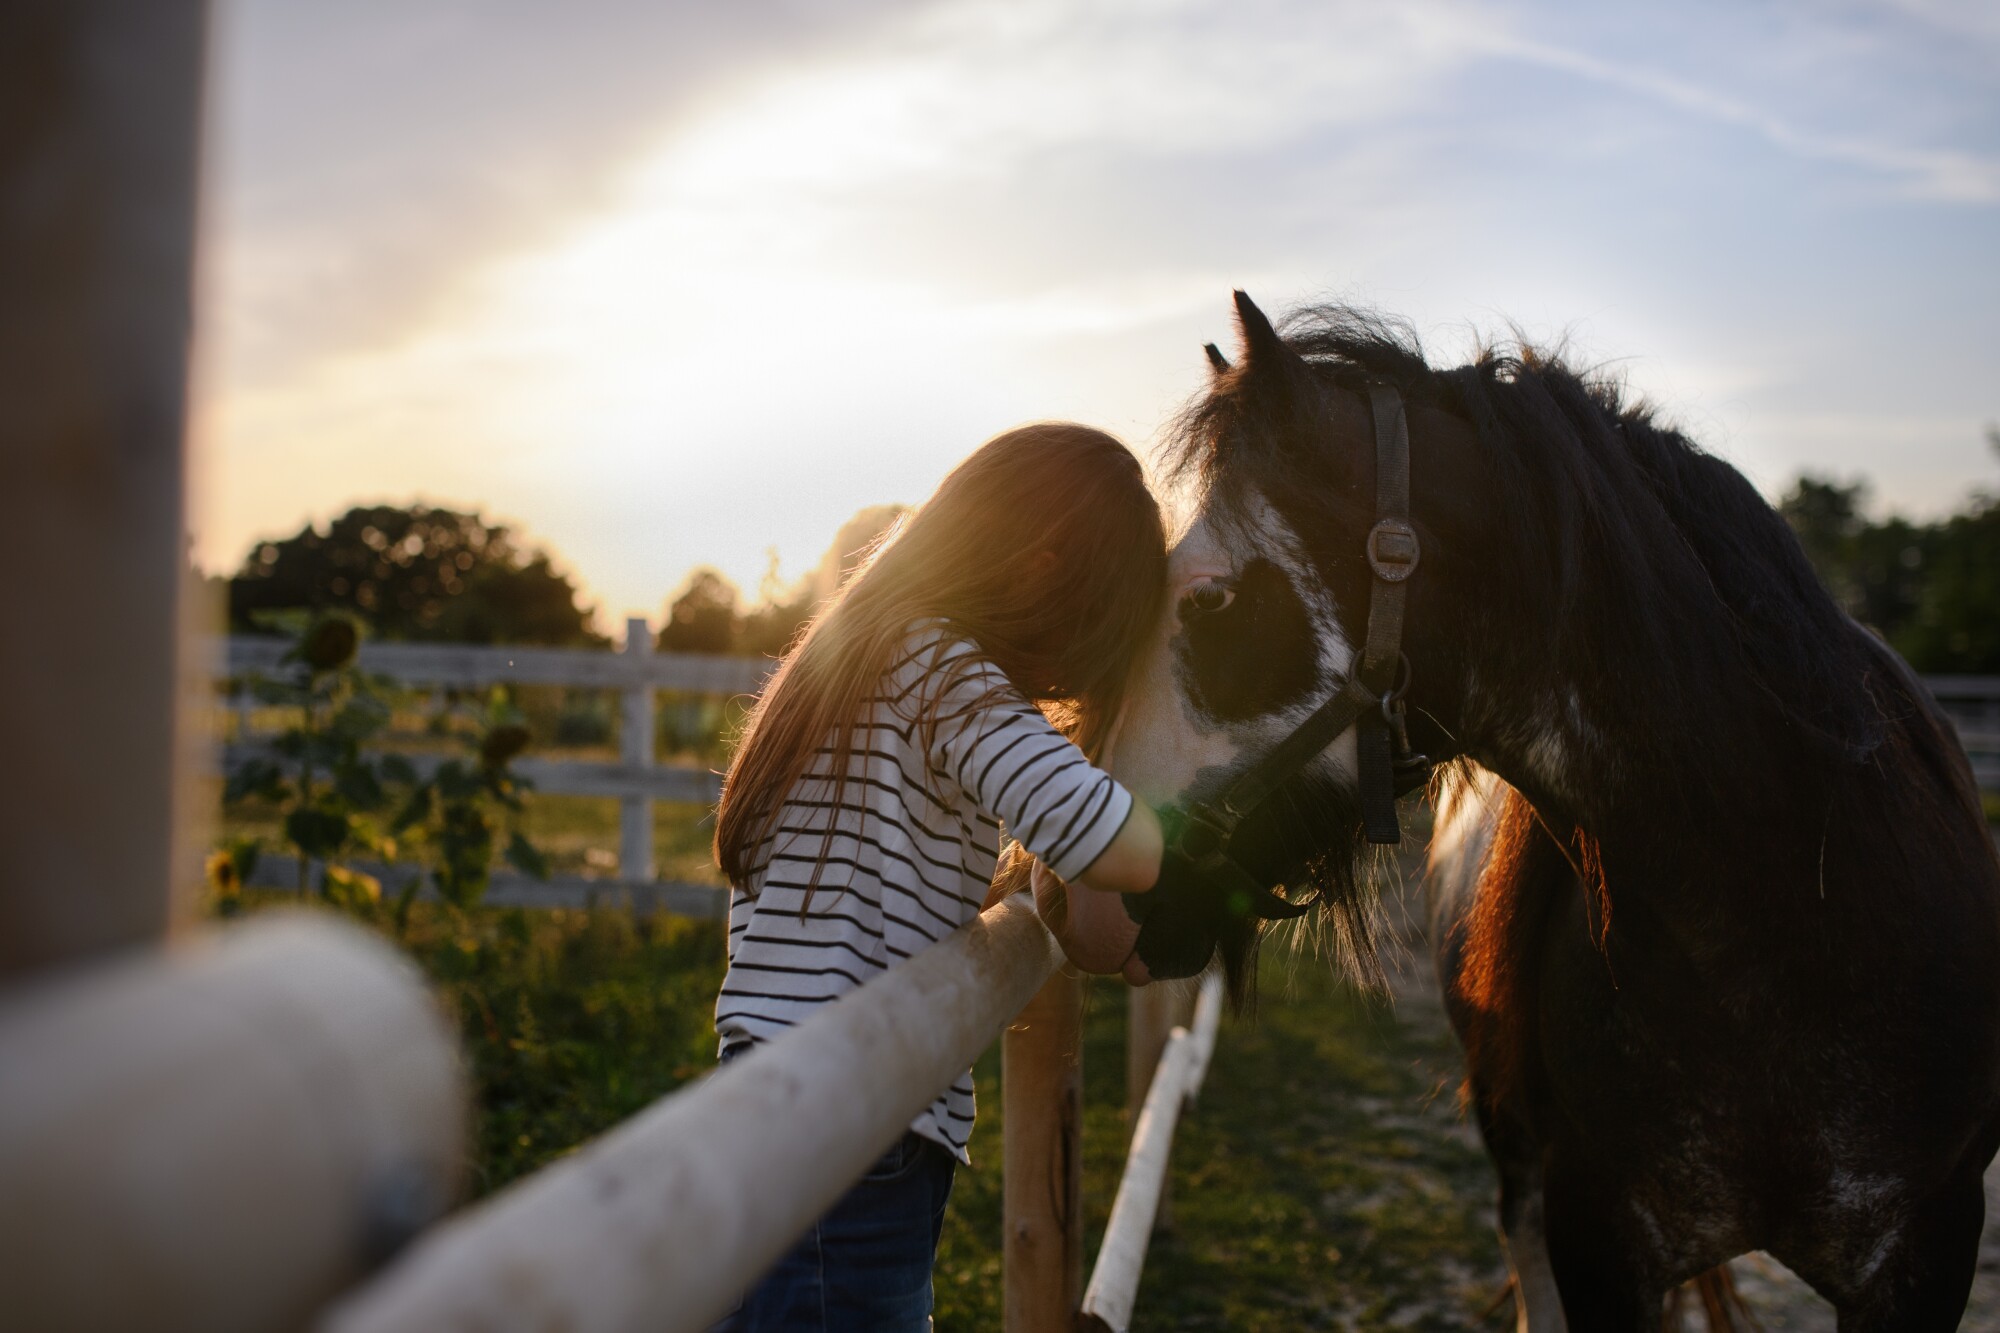 If you're considering adding horses to your family, then you'll need the right tools and knowledge. Learn all about farm horses here.